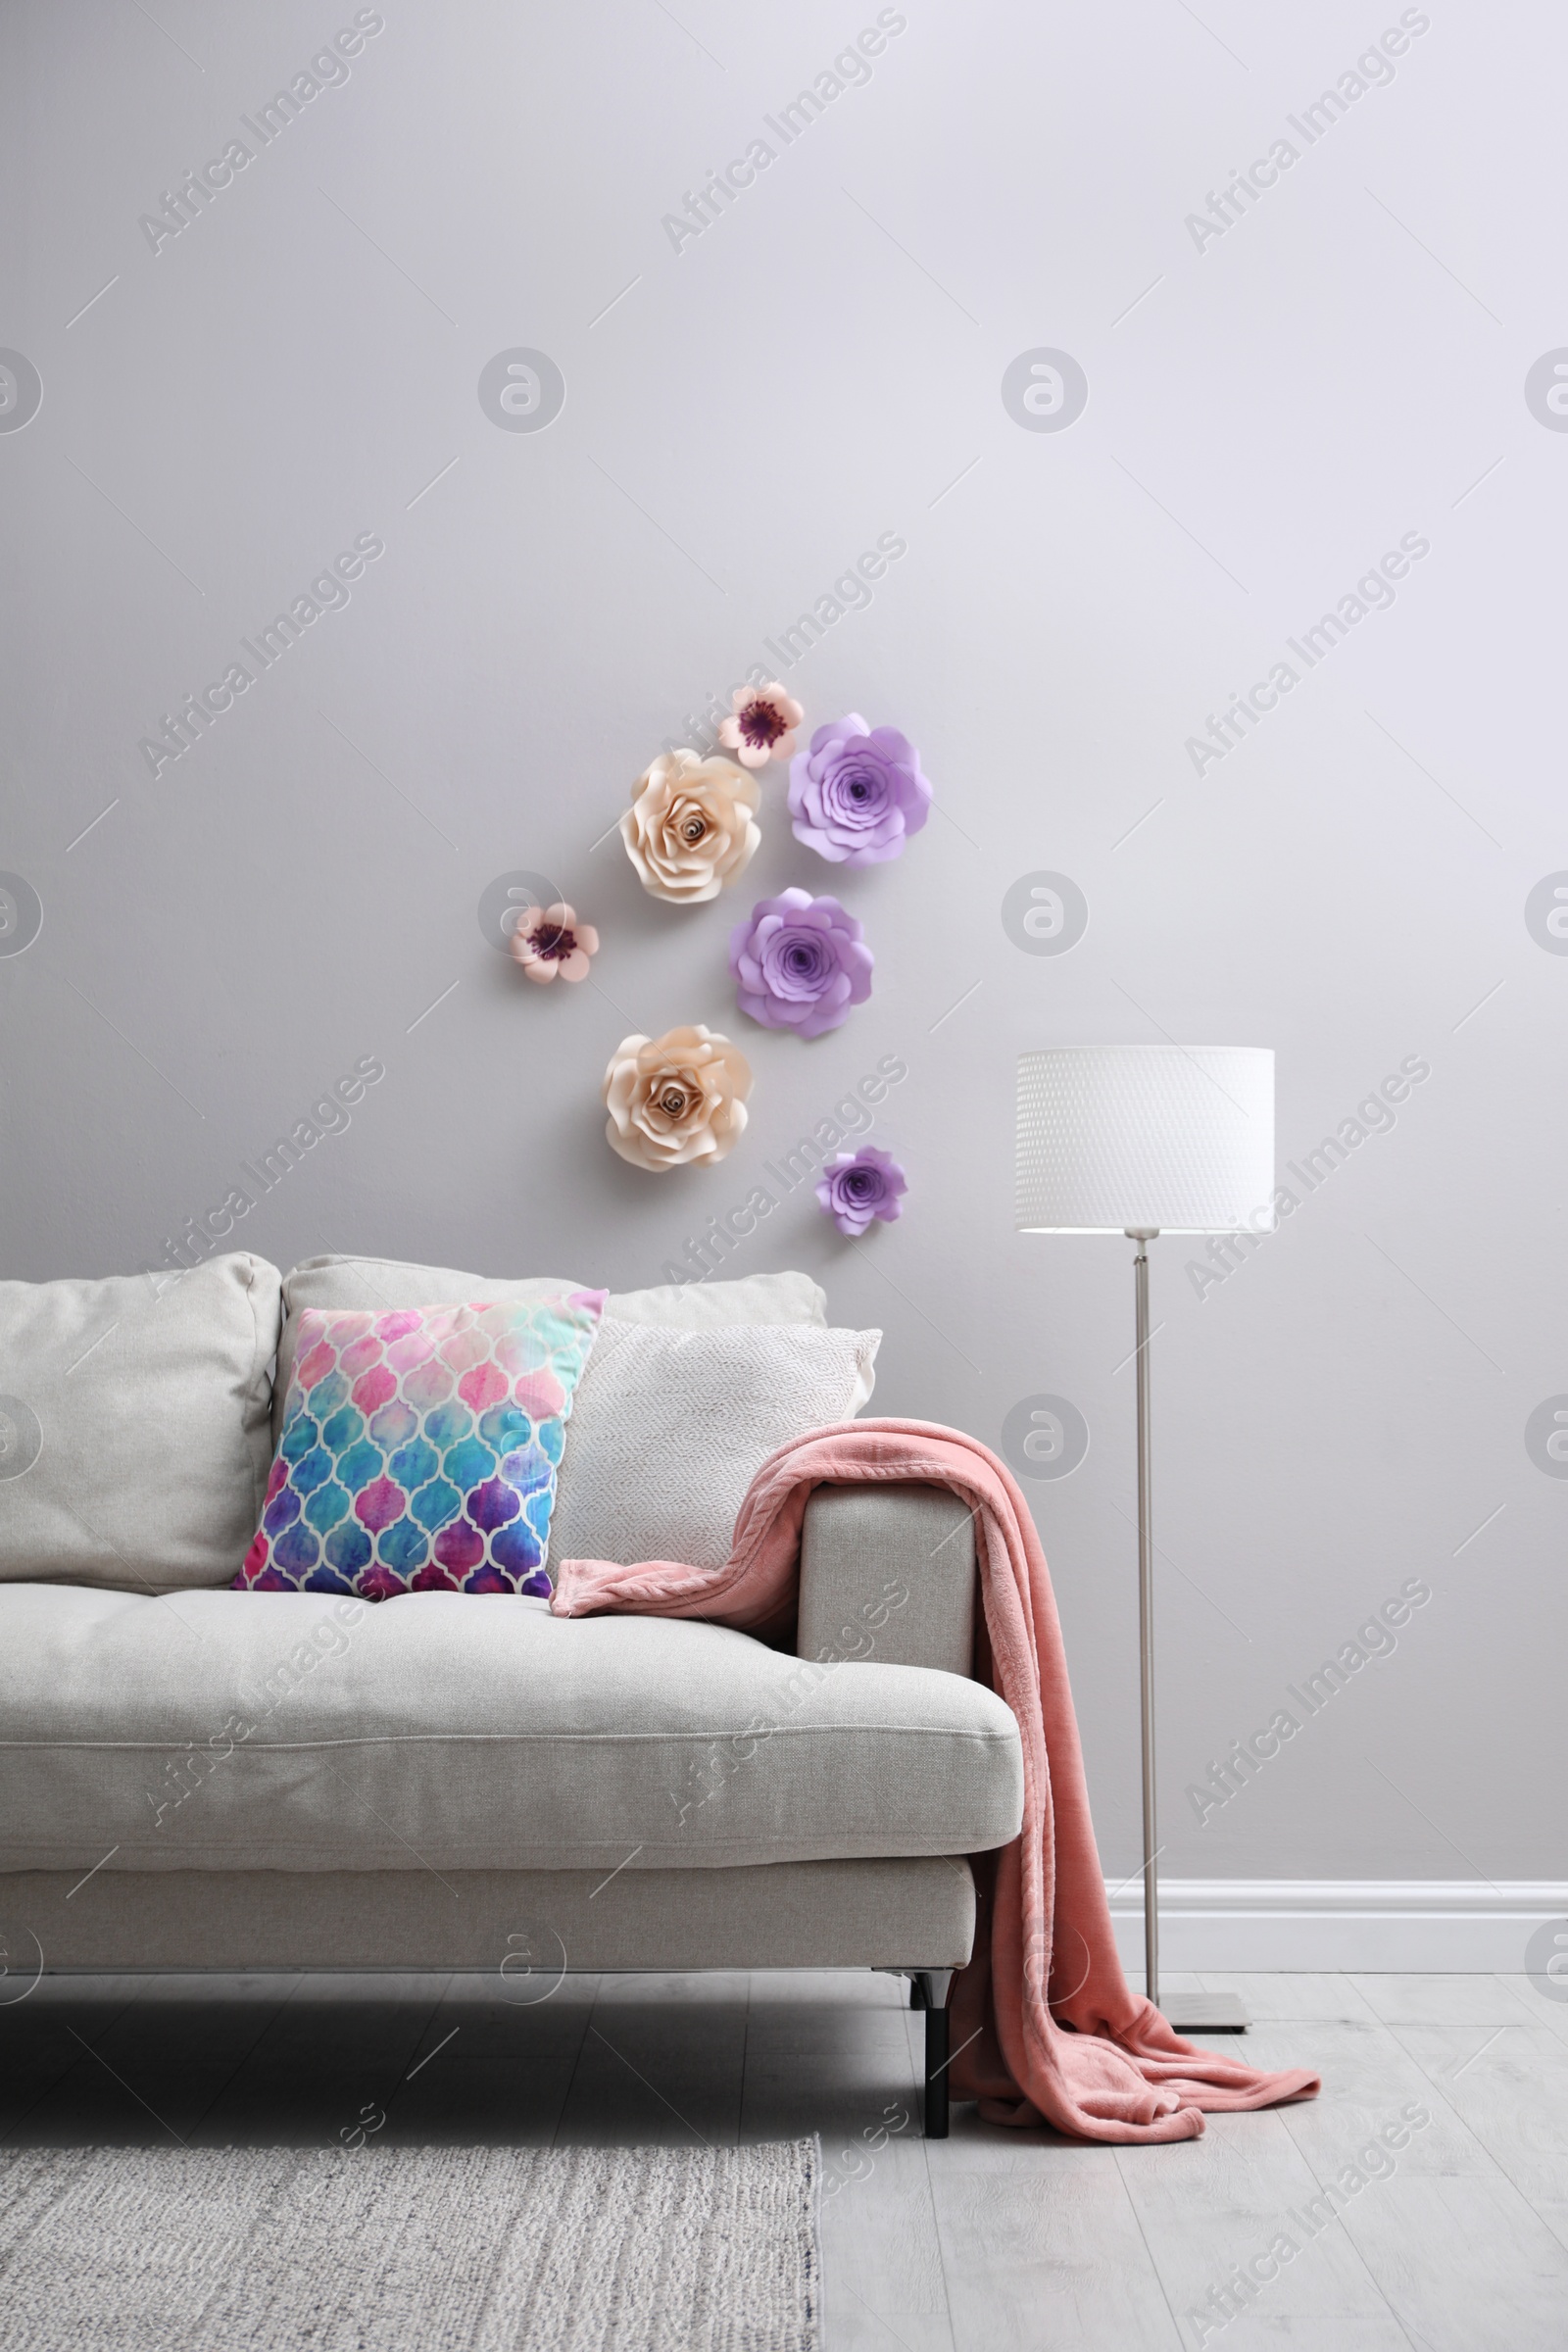 Photo of Comfortable sofa near wall with floral decor in living room